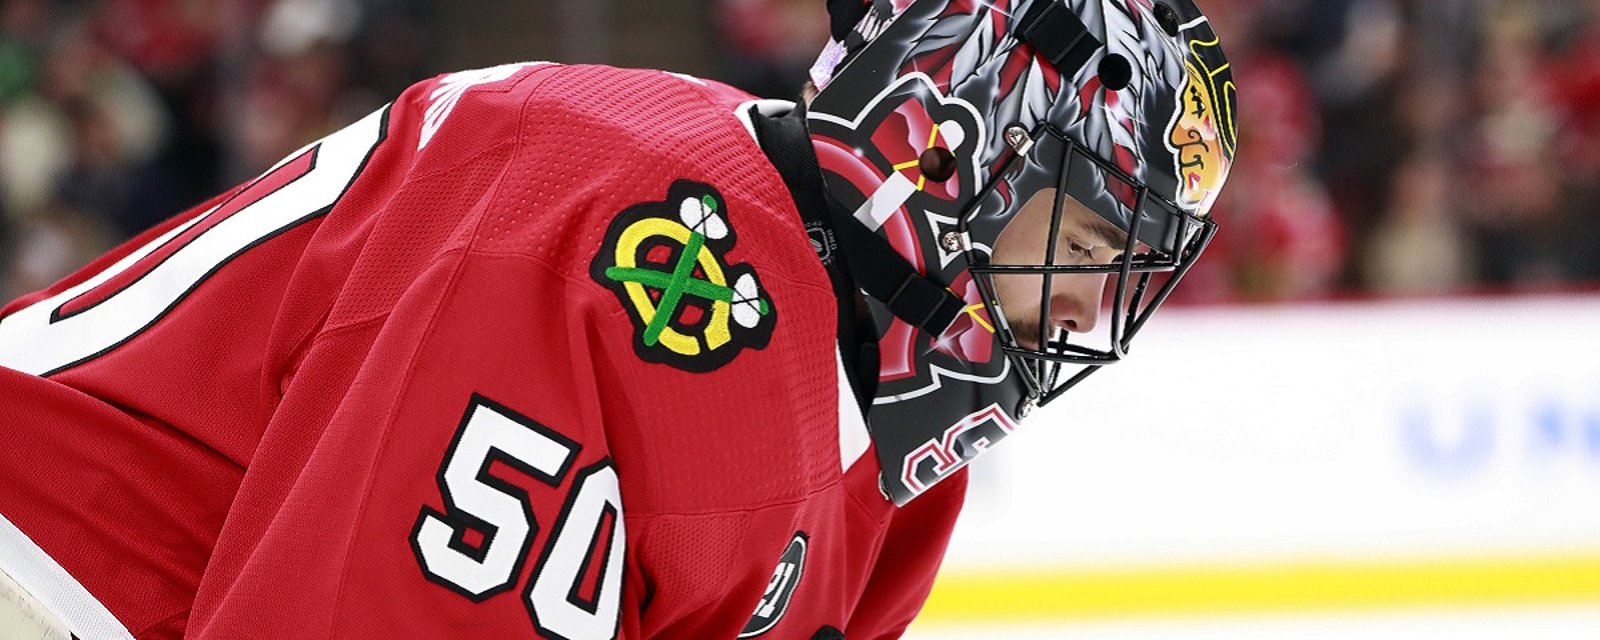 Rumor: Corey Crawford's time with the Blackhawks is coming to an end.